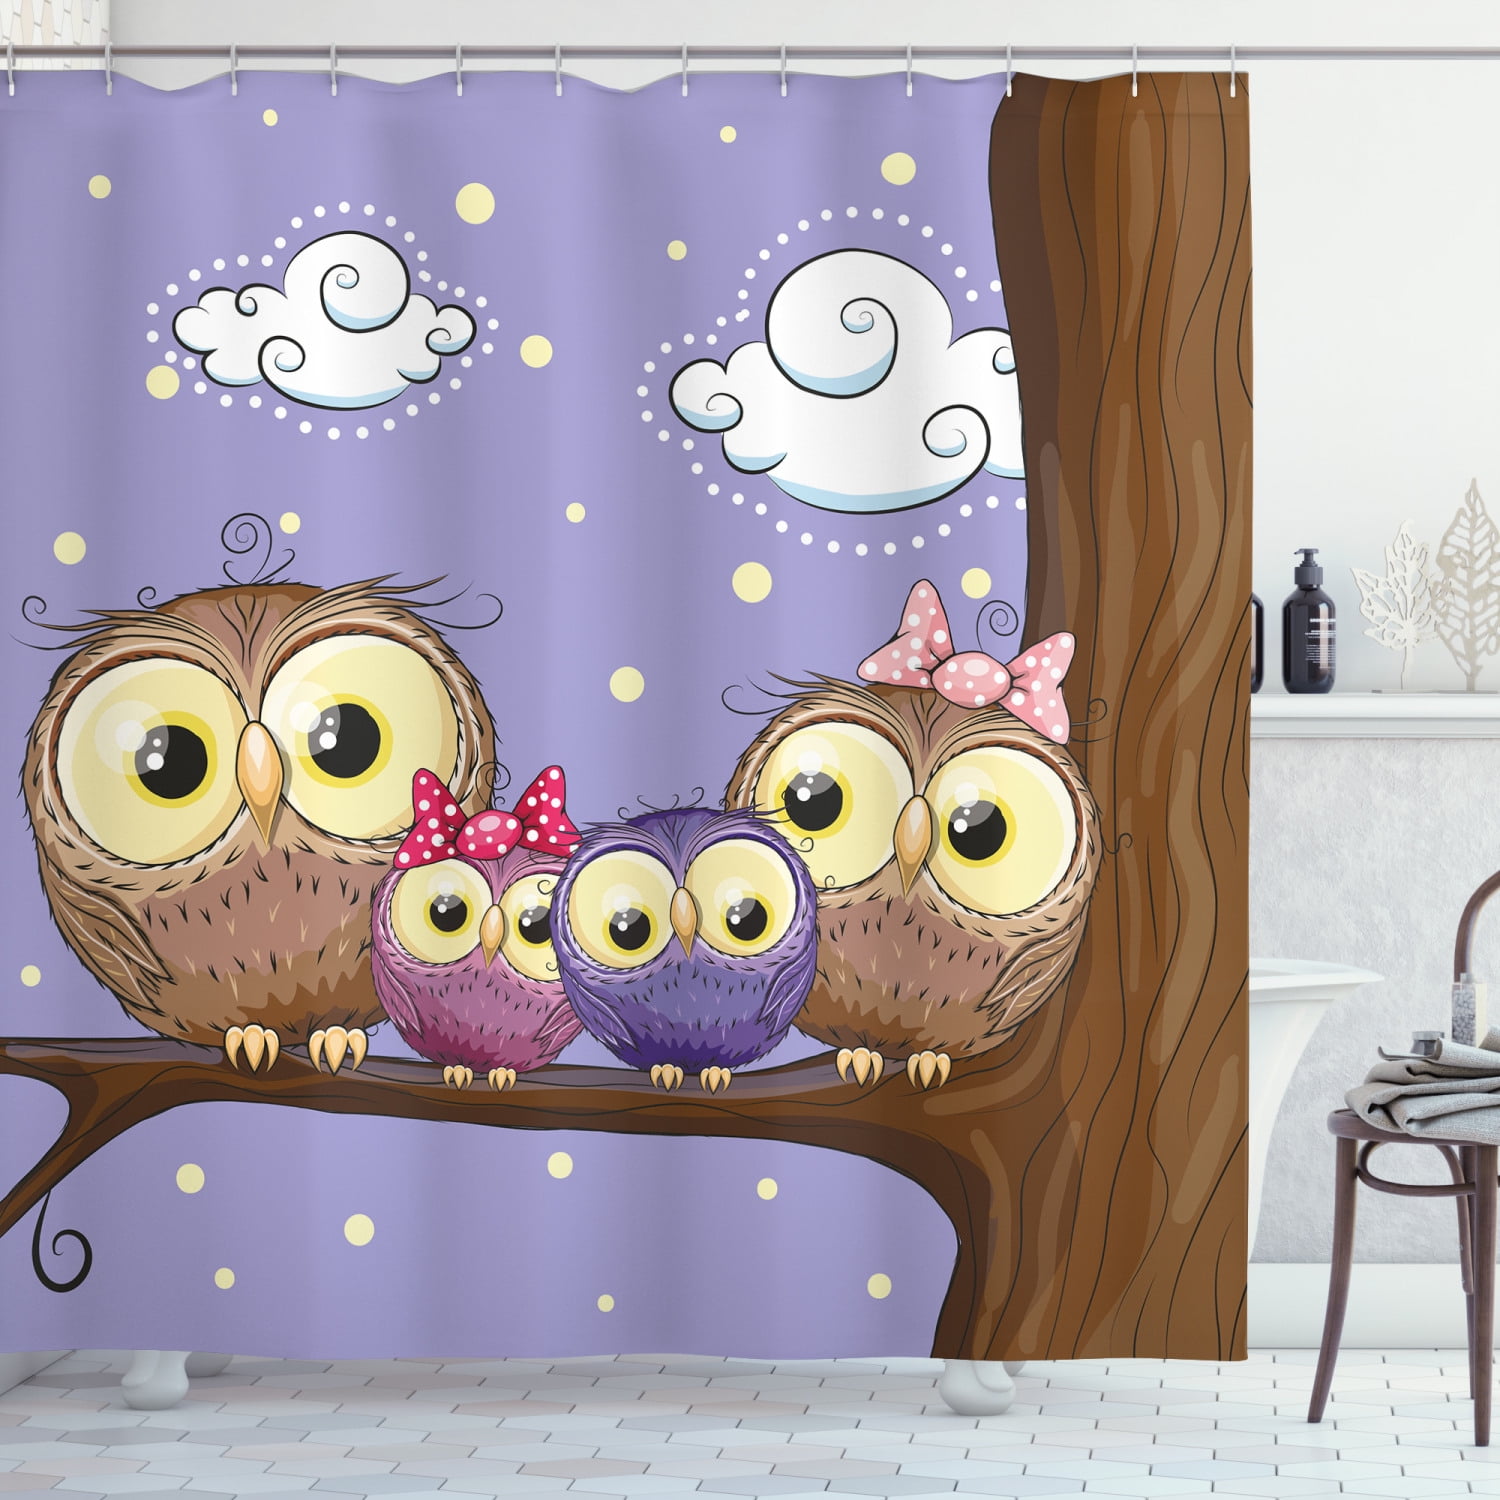 Shower Curtain Colorful Cartoon Owl Design Waterproof Polyester Fabric 12 Hooks 